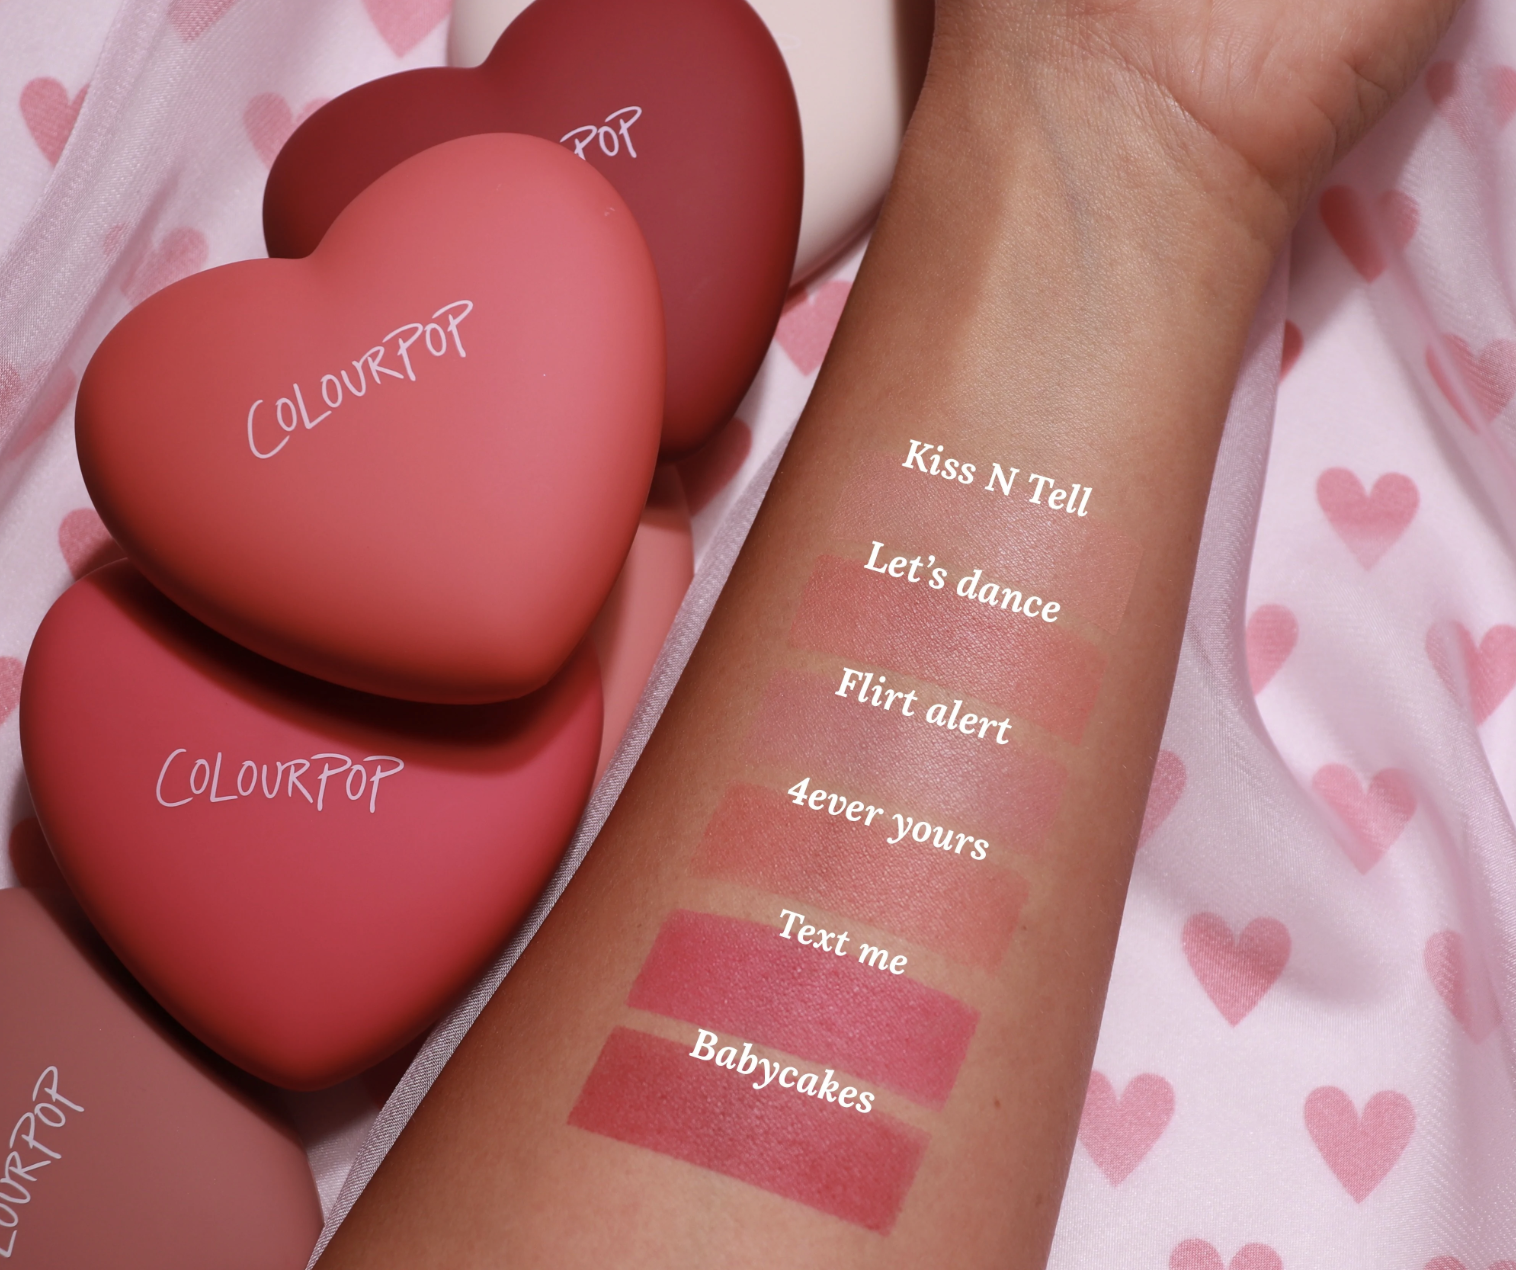 Swatches of the blushes on an arm, and the heart-shaped compacts